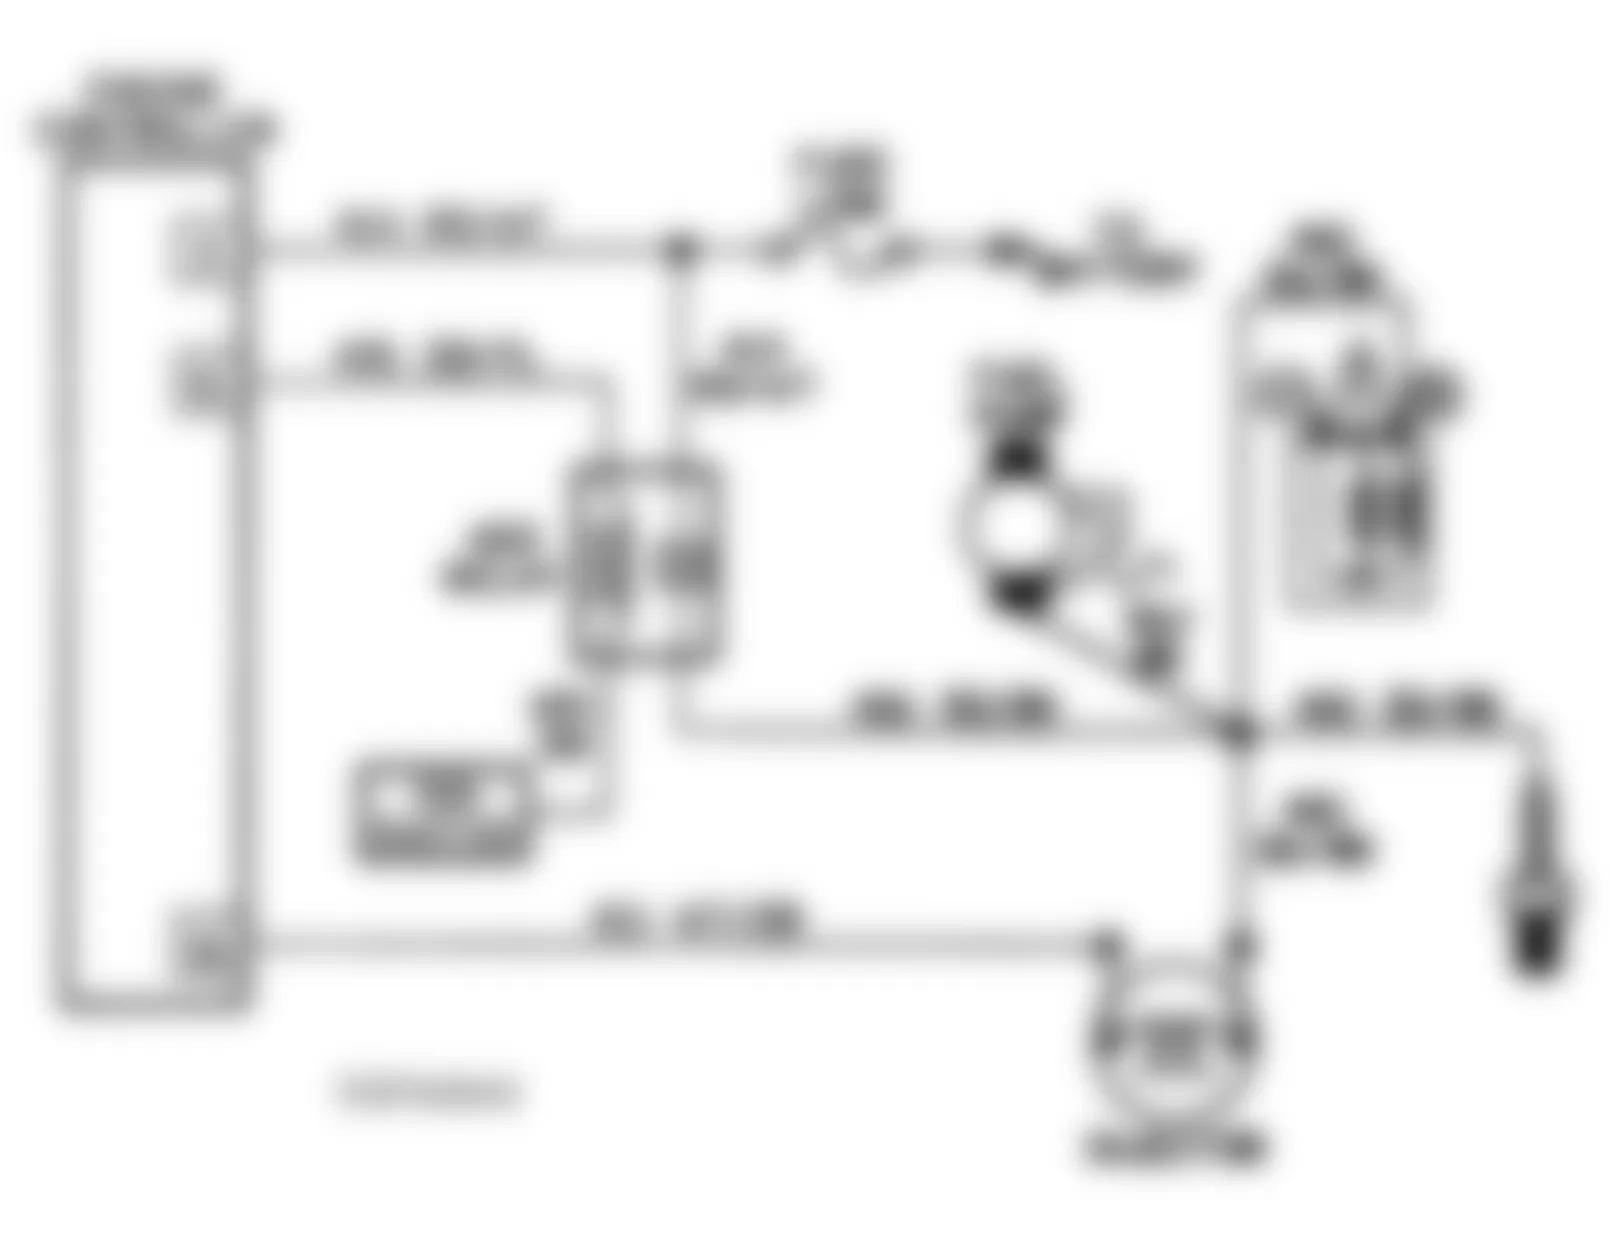 Chrysler LeBaron 1991 - Component Locations -  Test NS-10A Code 42, Circuit Diagram.